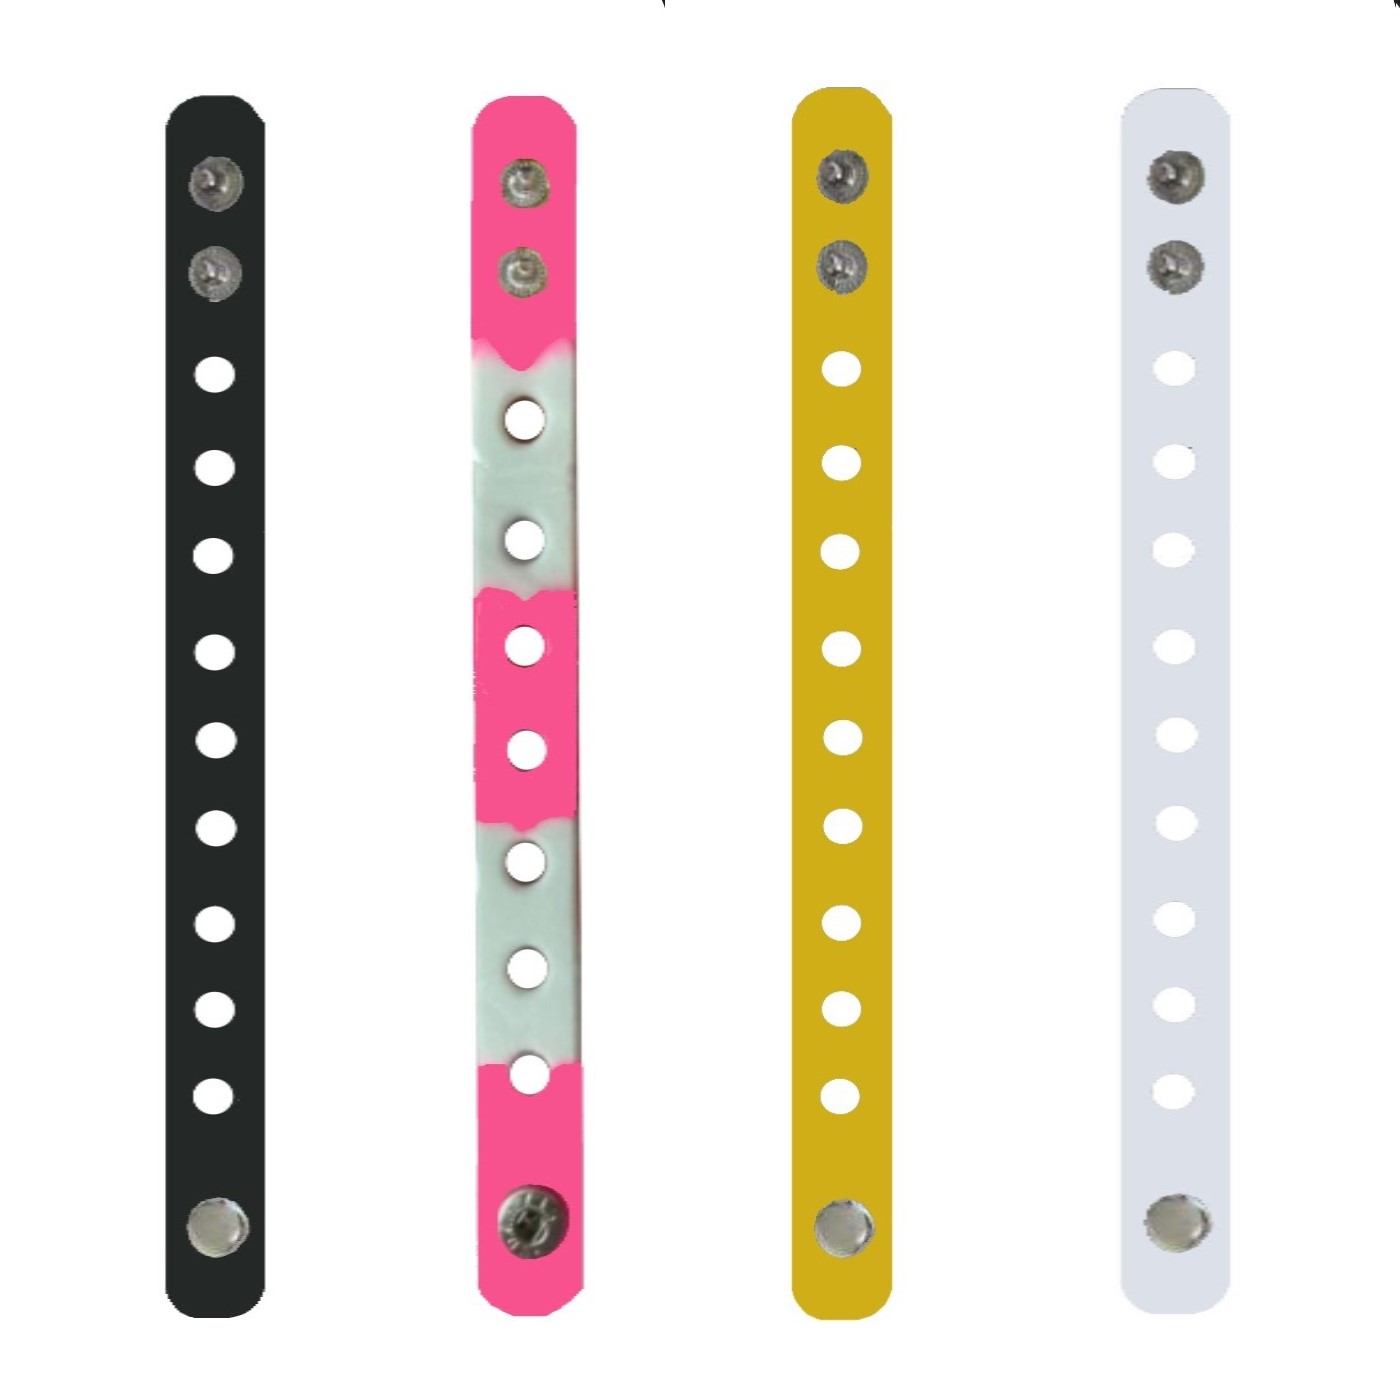 Pikkaboo Personalized Wristband Bracelet with Charms